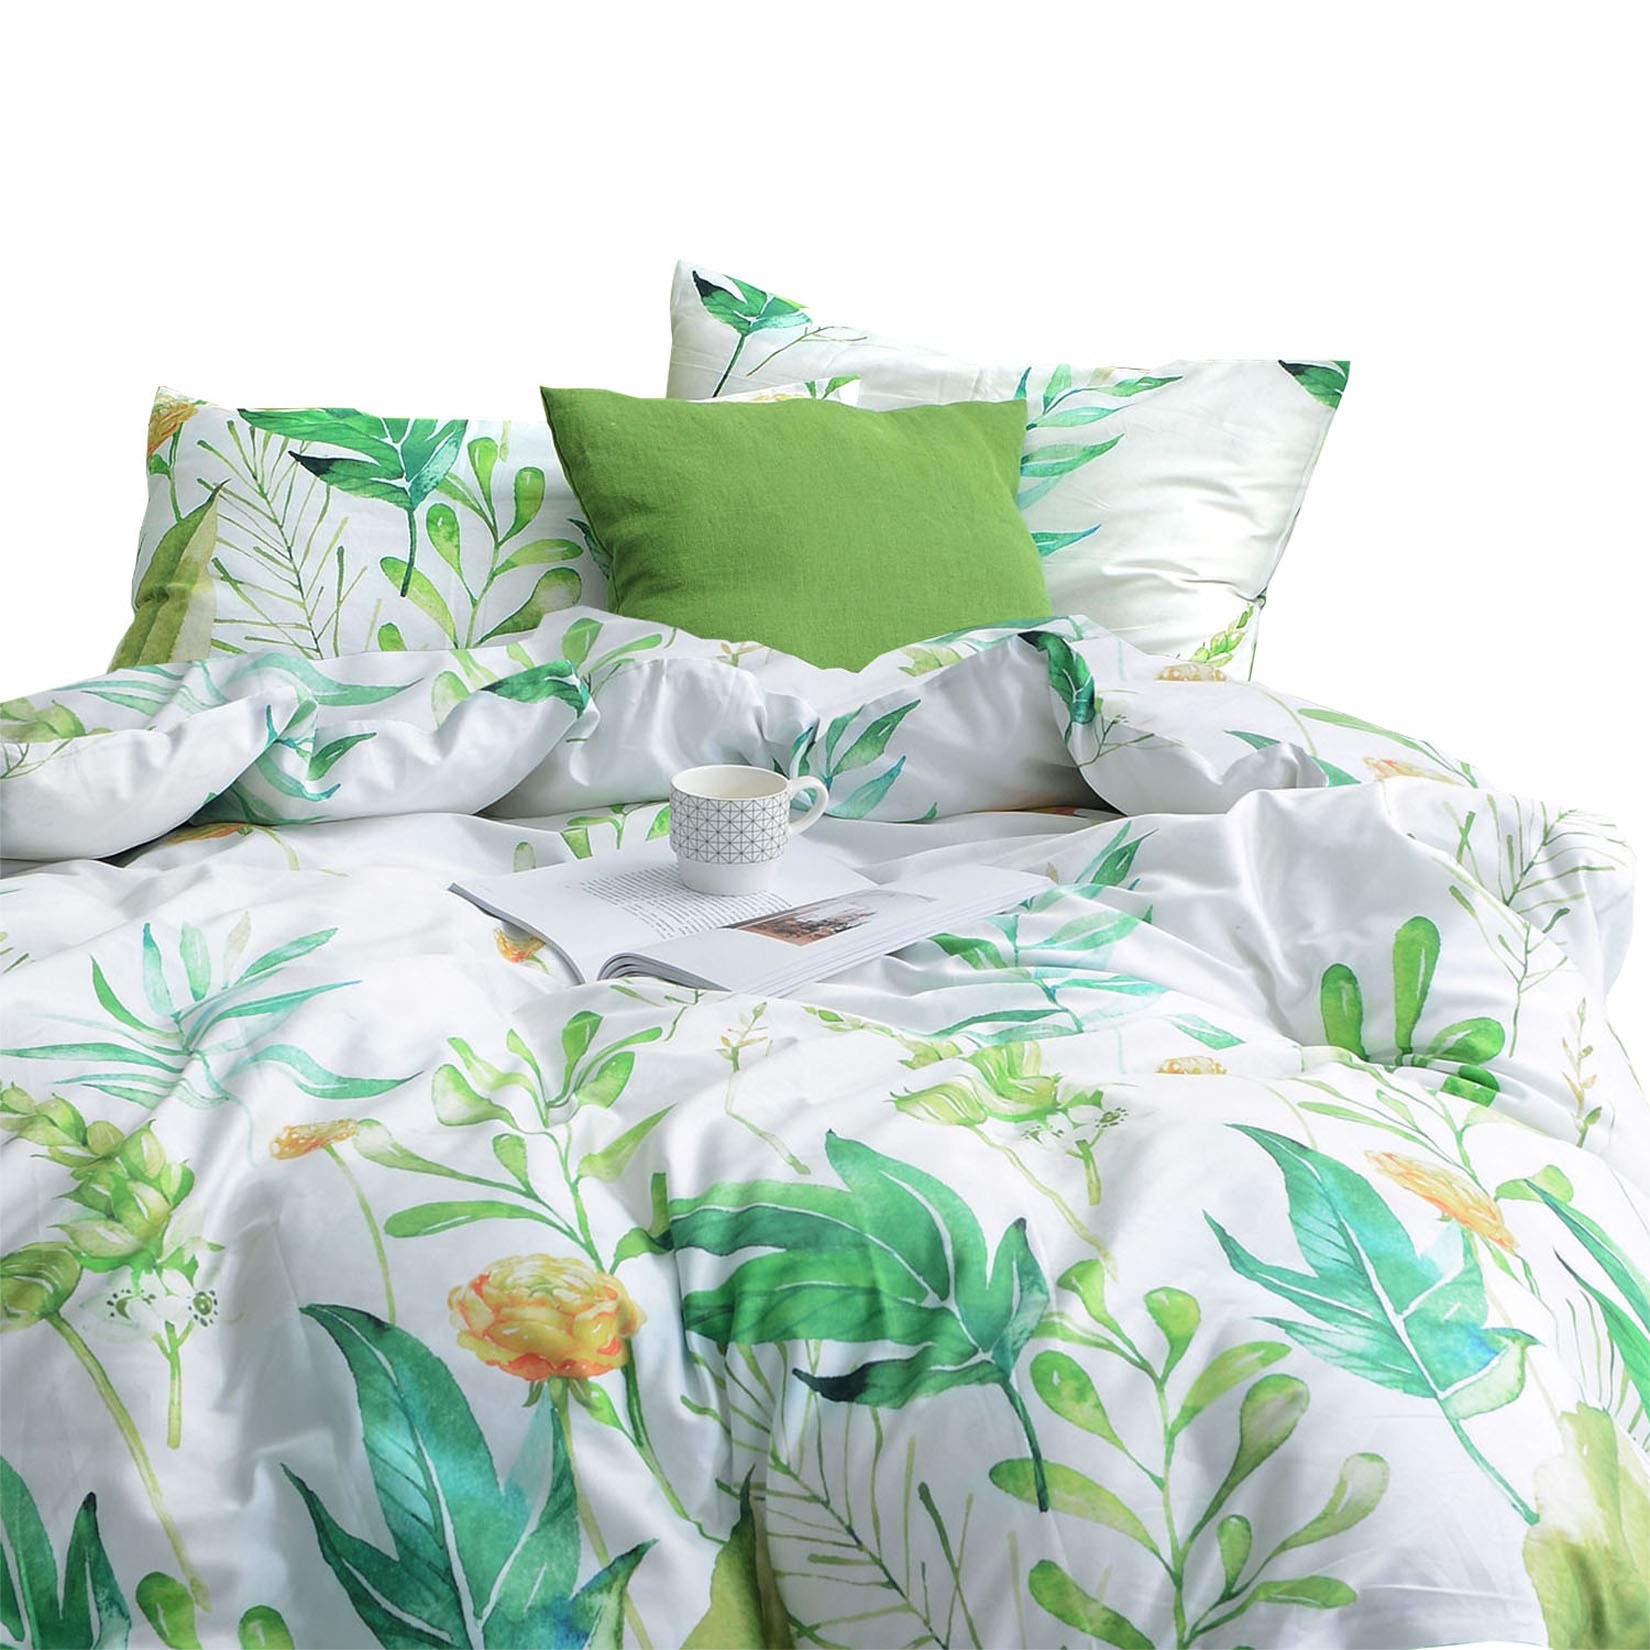 Book Cover Wake In Cloud - Floral Comforter Set, 100% Cotton Fabric with Soft Microfiber Fill Bedding, Botanical Flowers and Green Tree Leaves Pattern Printed on White (3pcs, King Size)